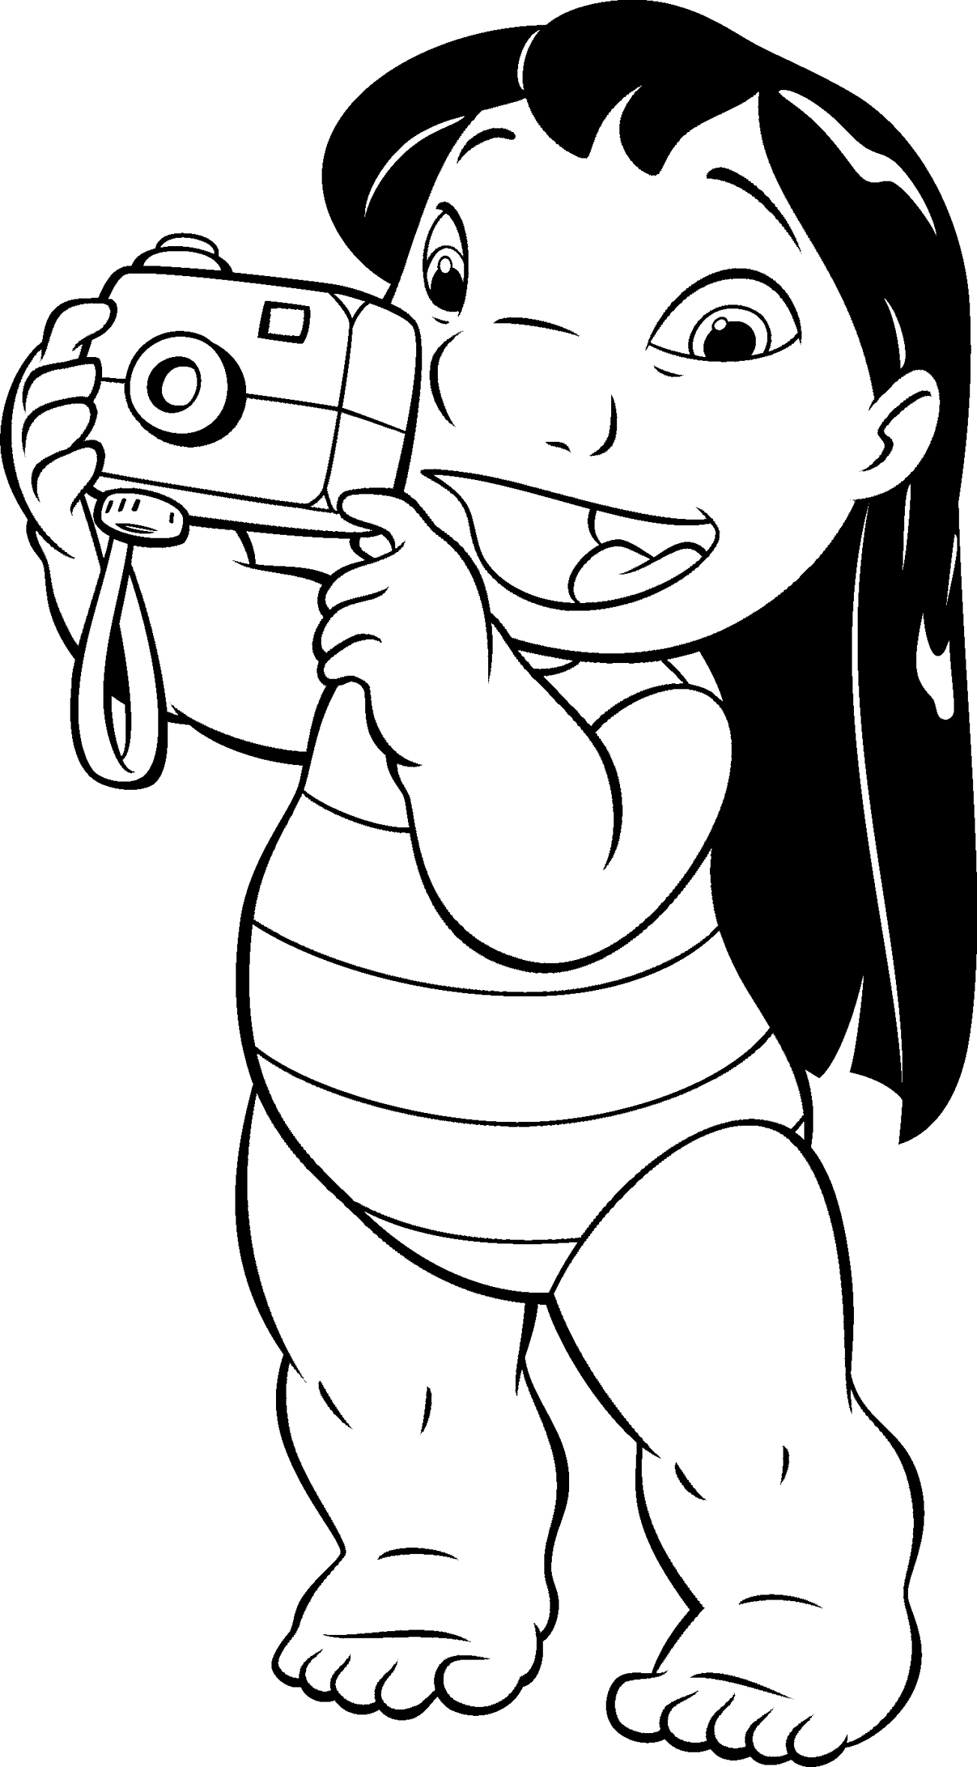 Free Lilo and stich coloring pages   Lilo And Stich Kids Coloring ...